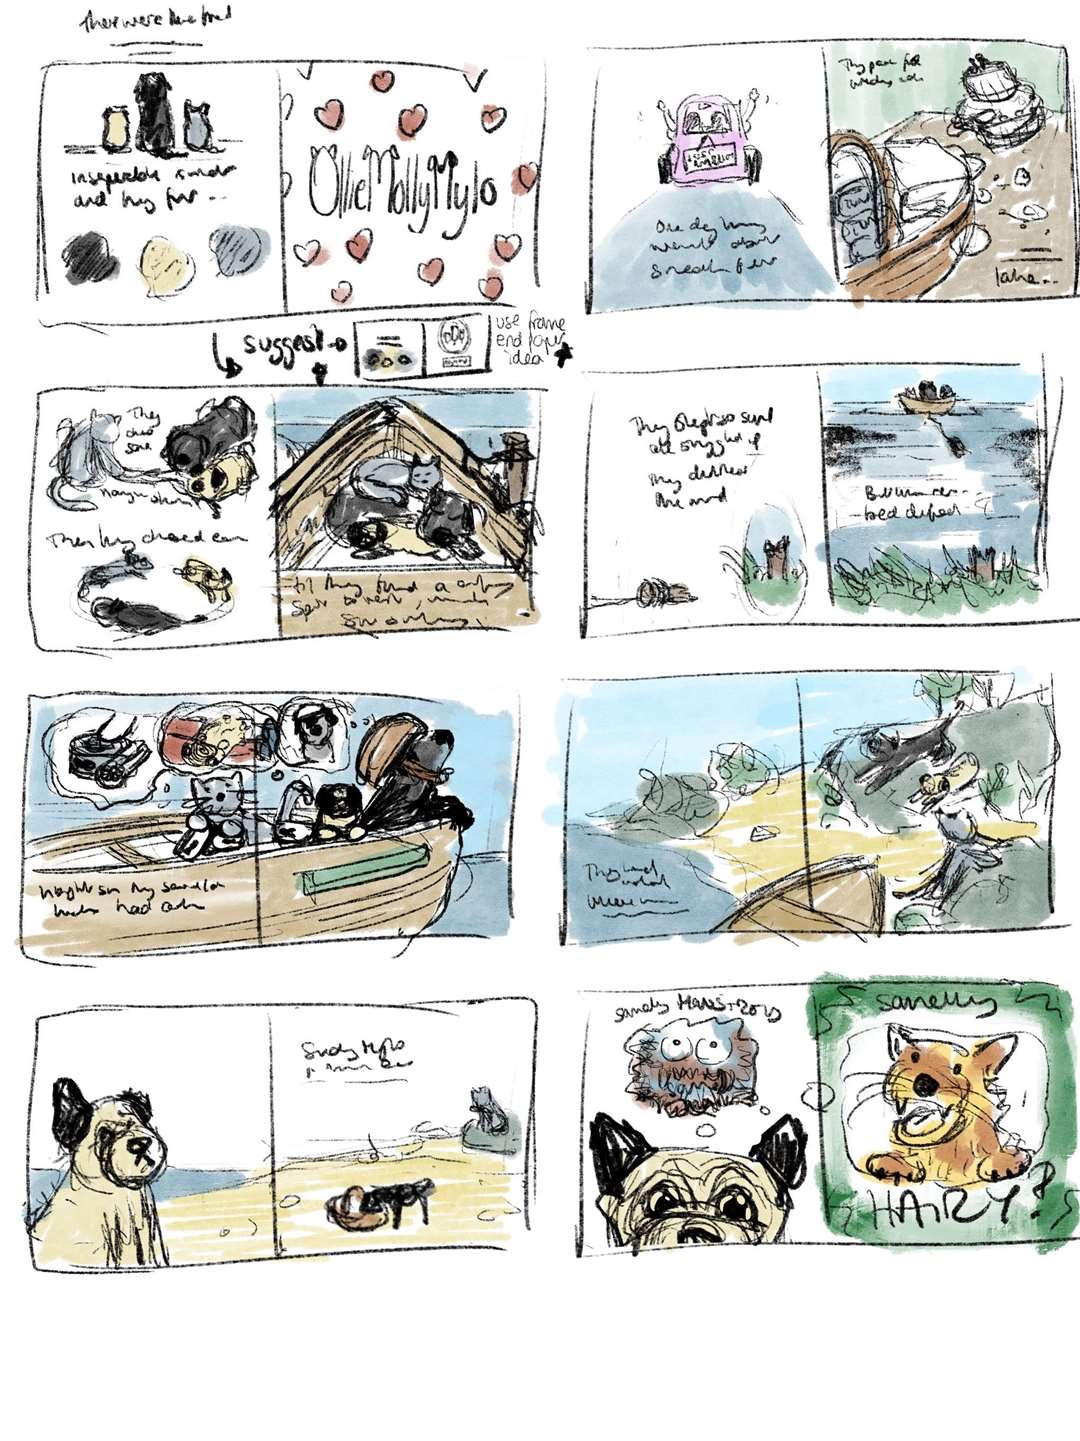 A storyboard of Catherine's drawings for the book OllieMollyMylo